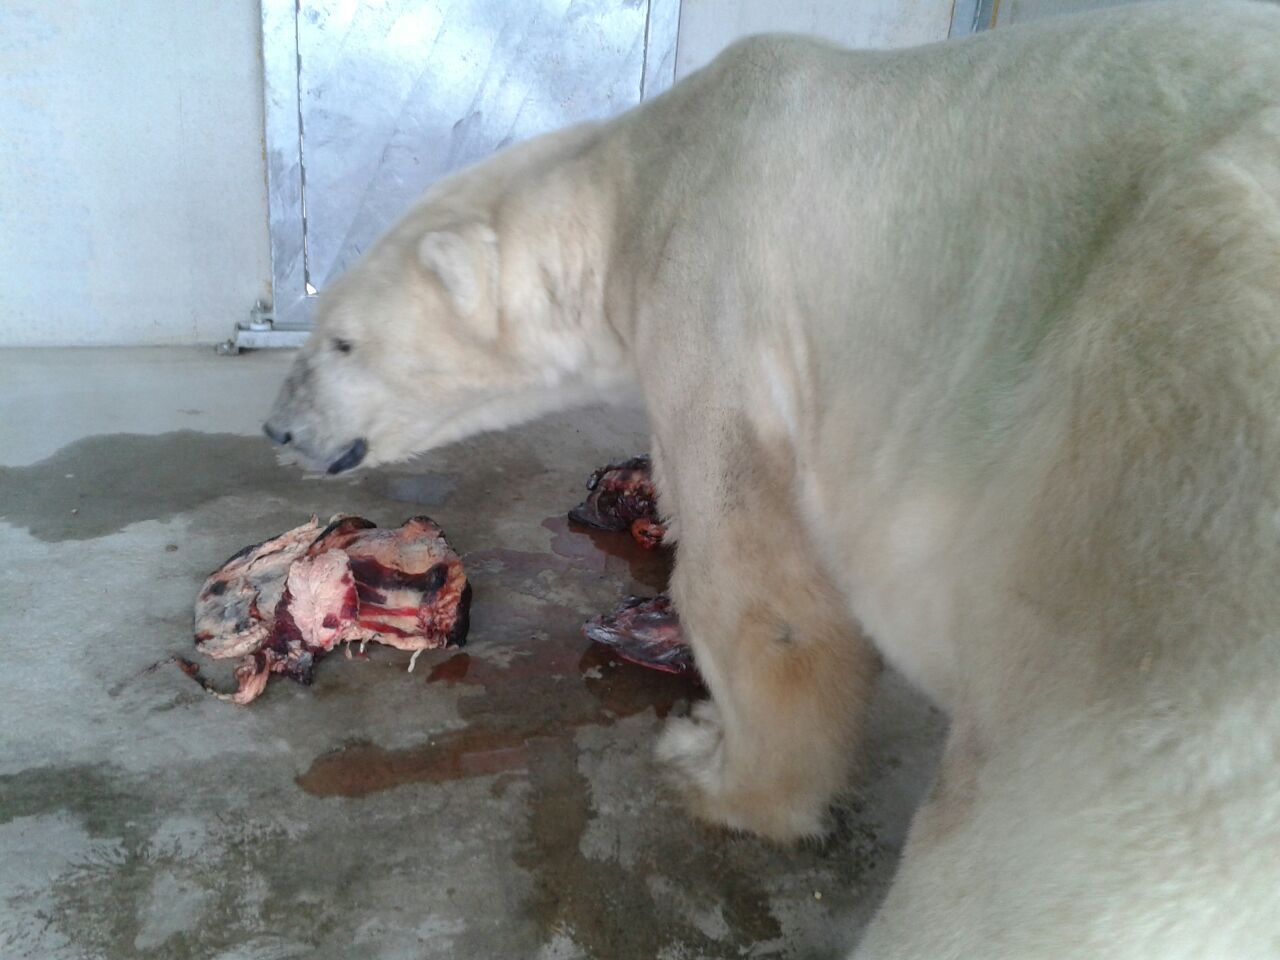 Has anybody eaten polar bear meat? What was your opinion of it